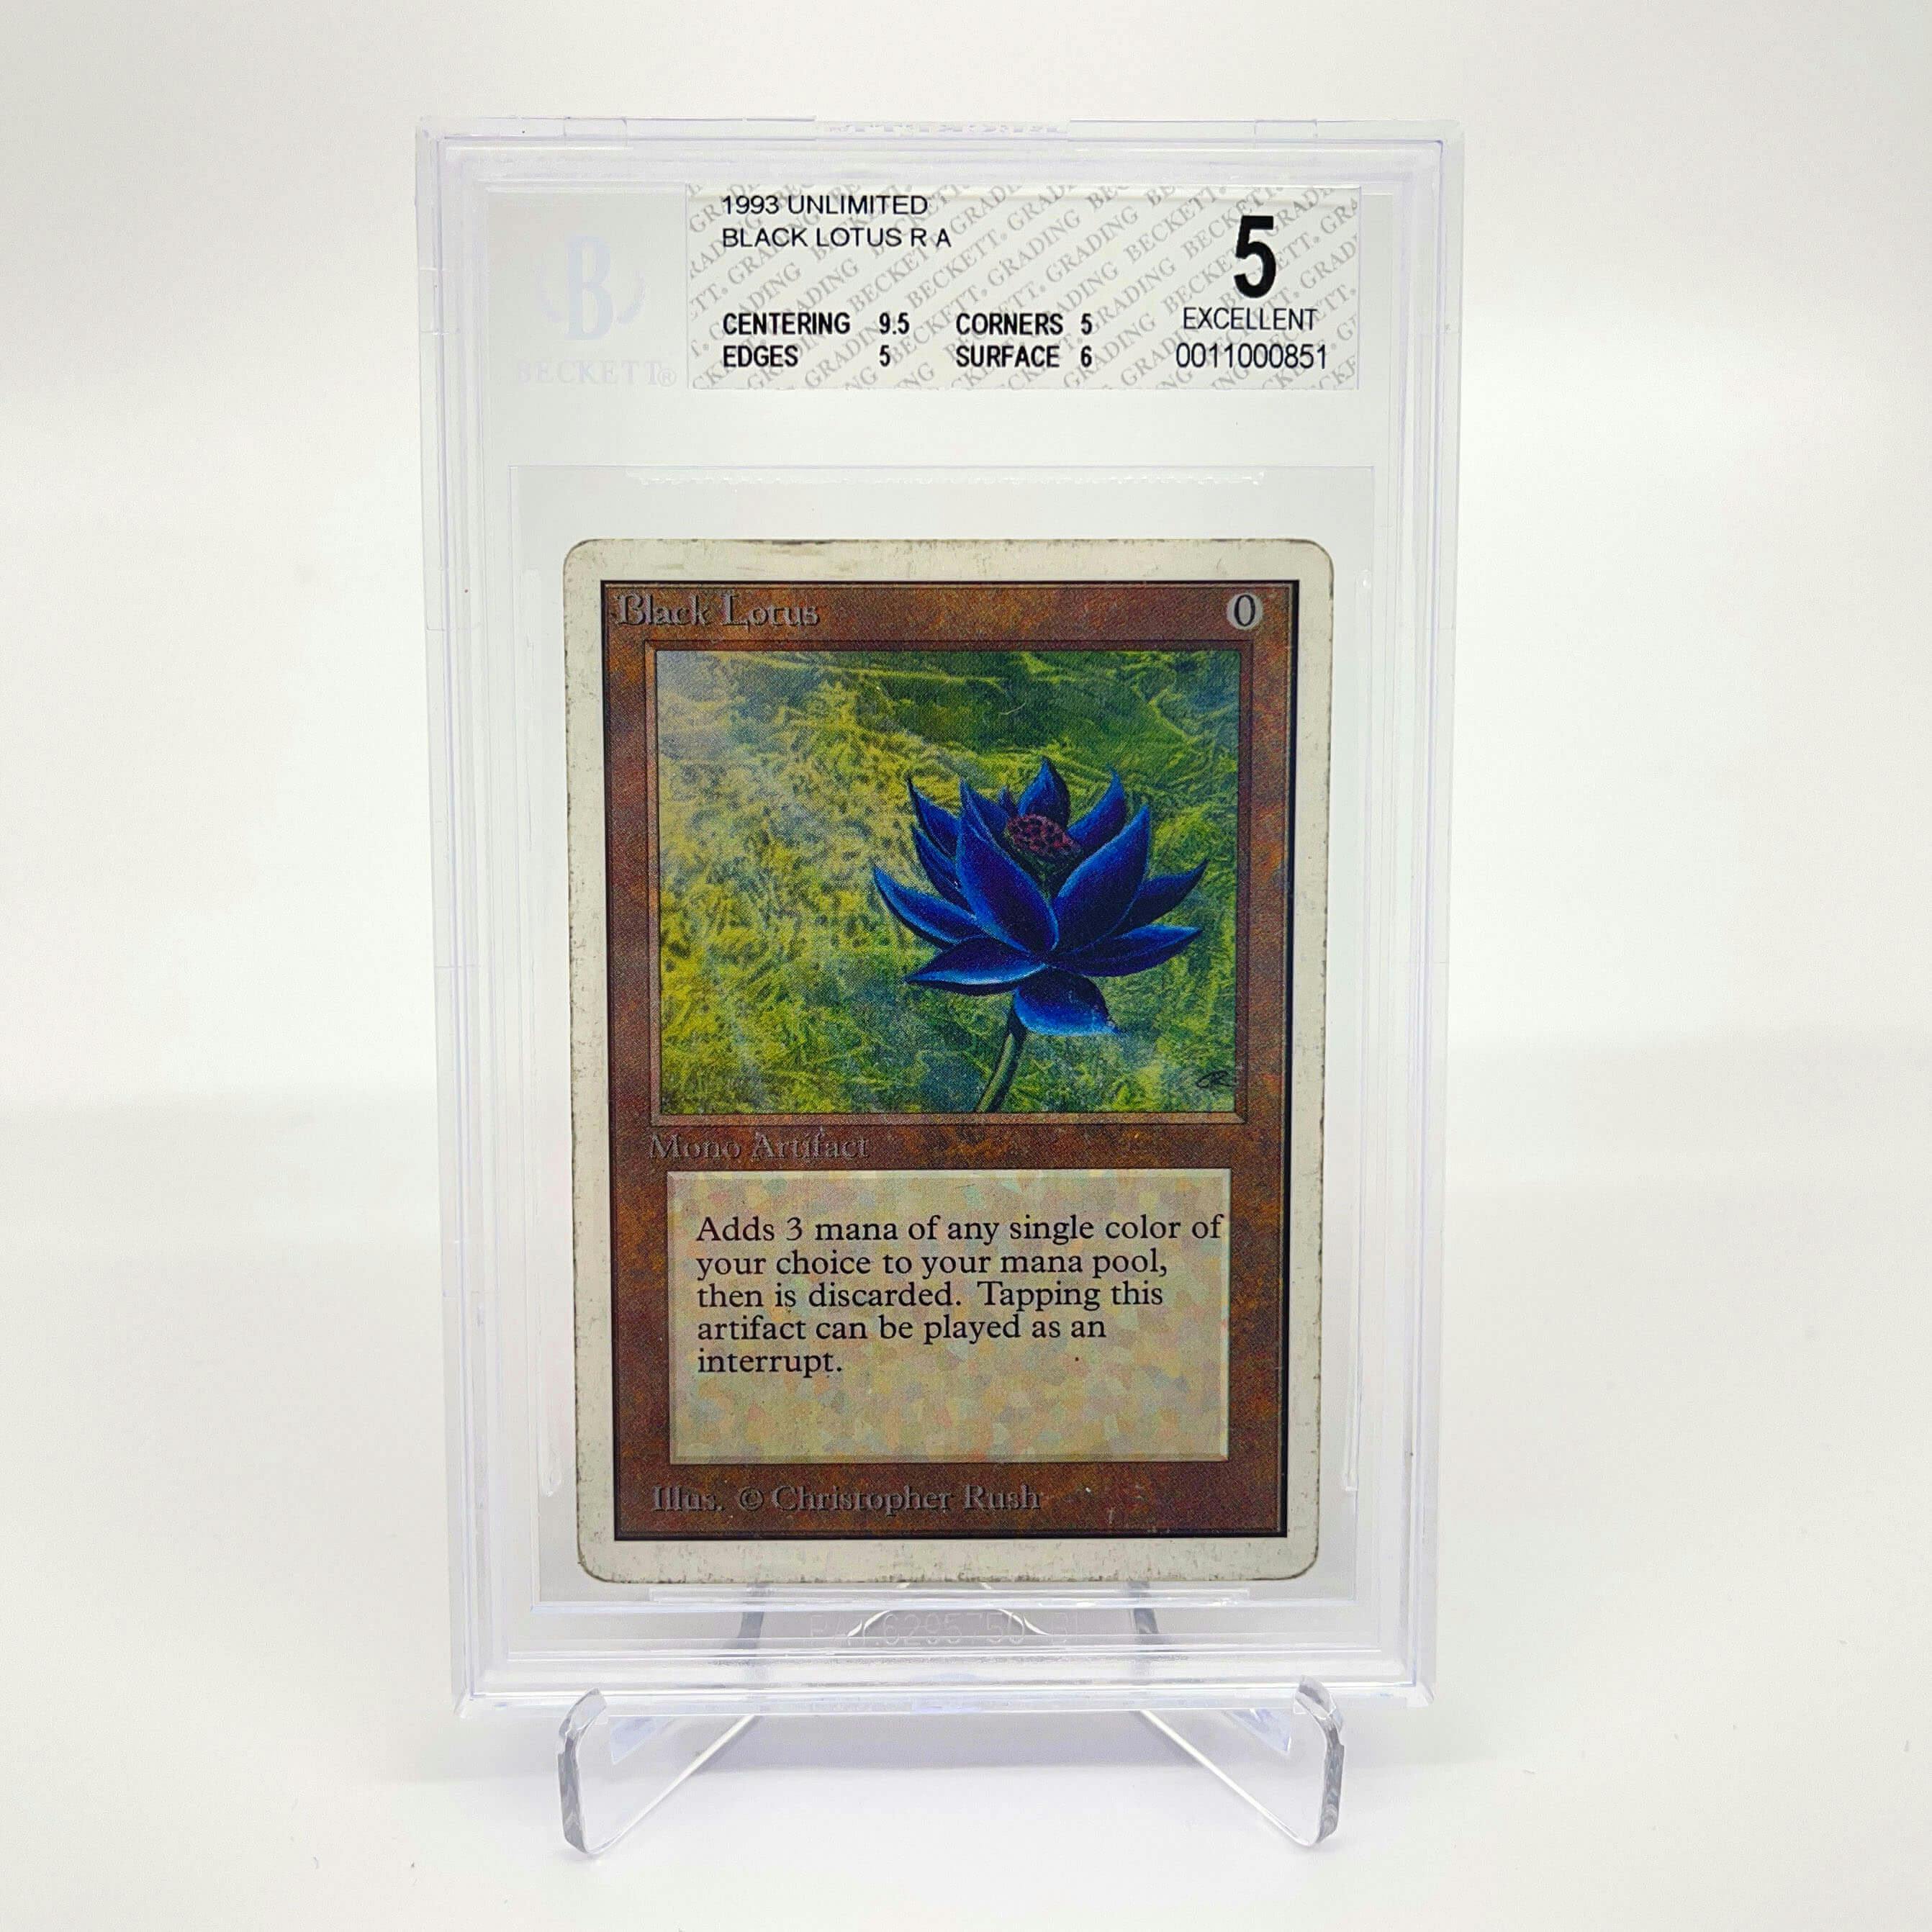 Magic: The Gathering Black Lotus Unlimited BGS 5 Excellent 